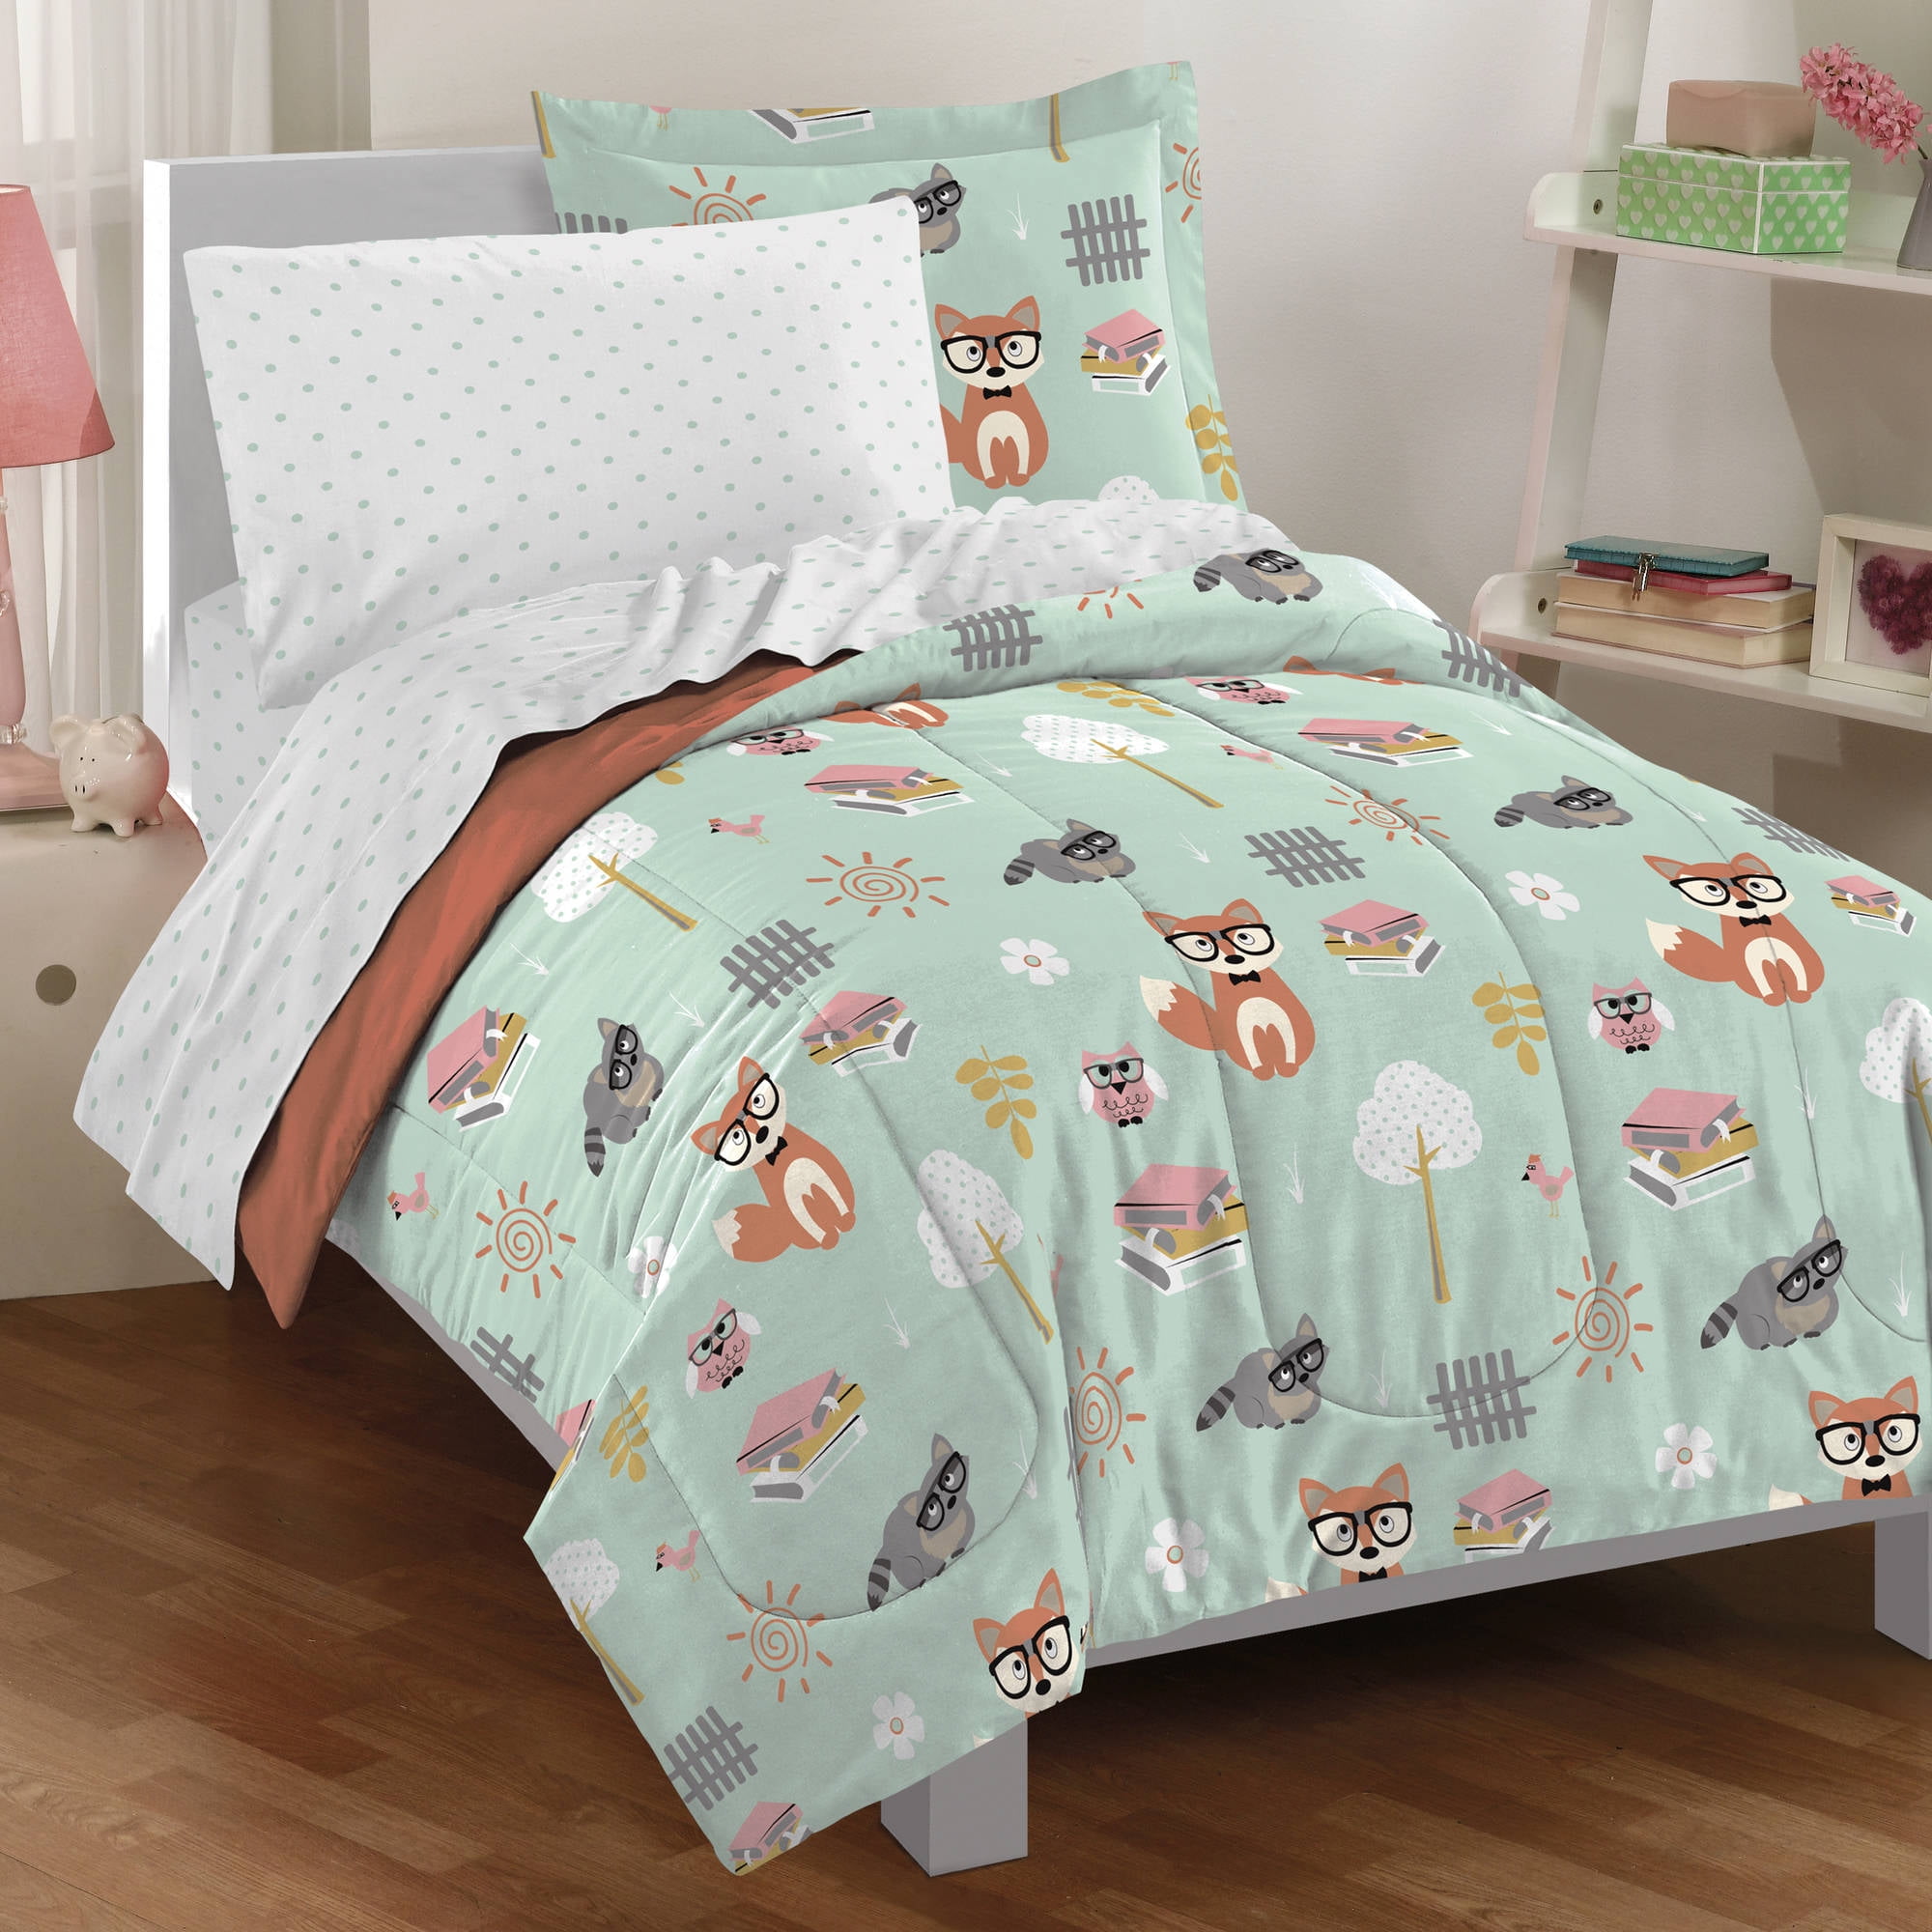 Dream Factory Animal Print Dog Princess, Bed Bath And Beyond Bed In A Bag Twin